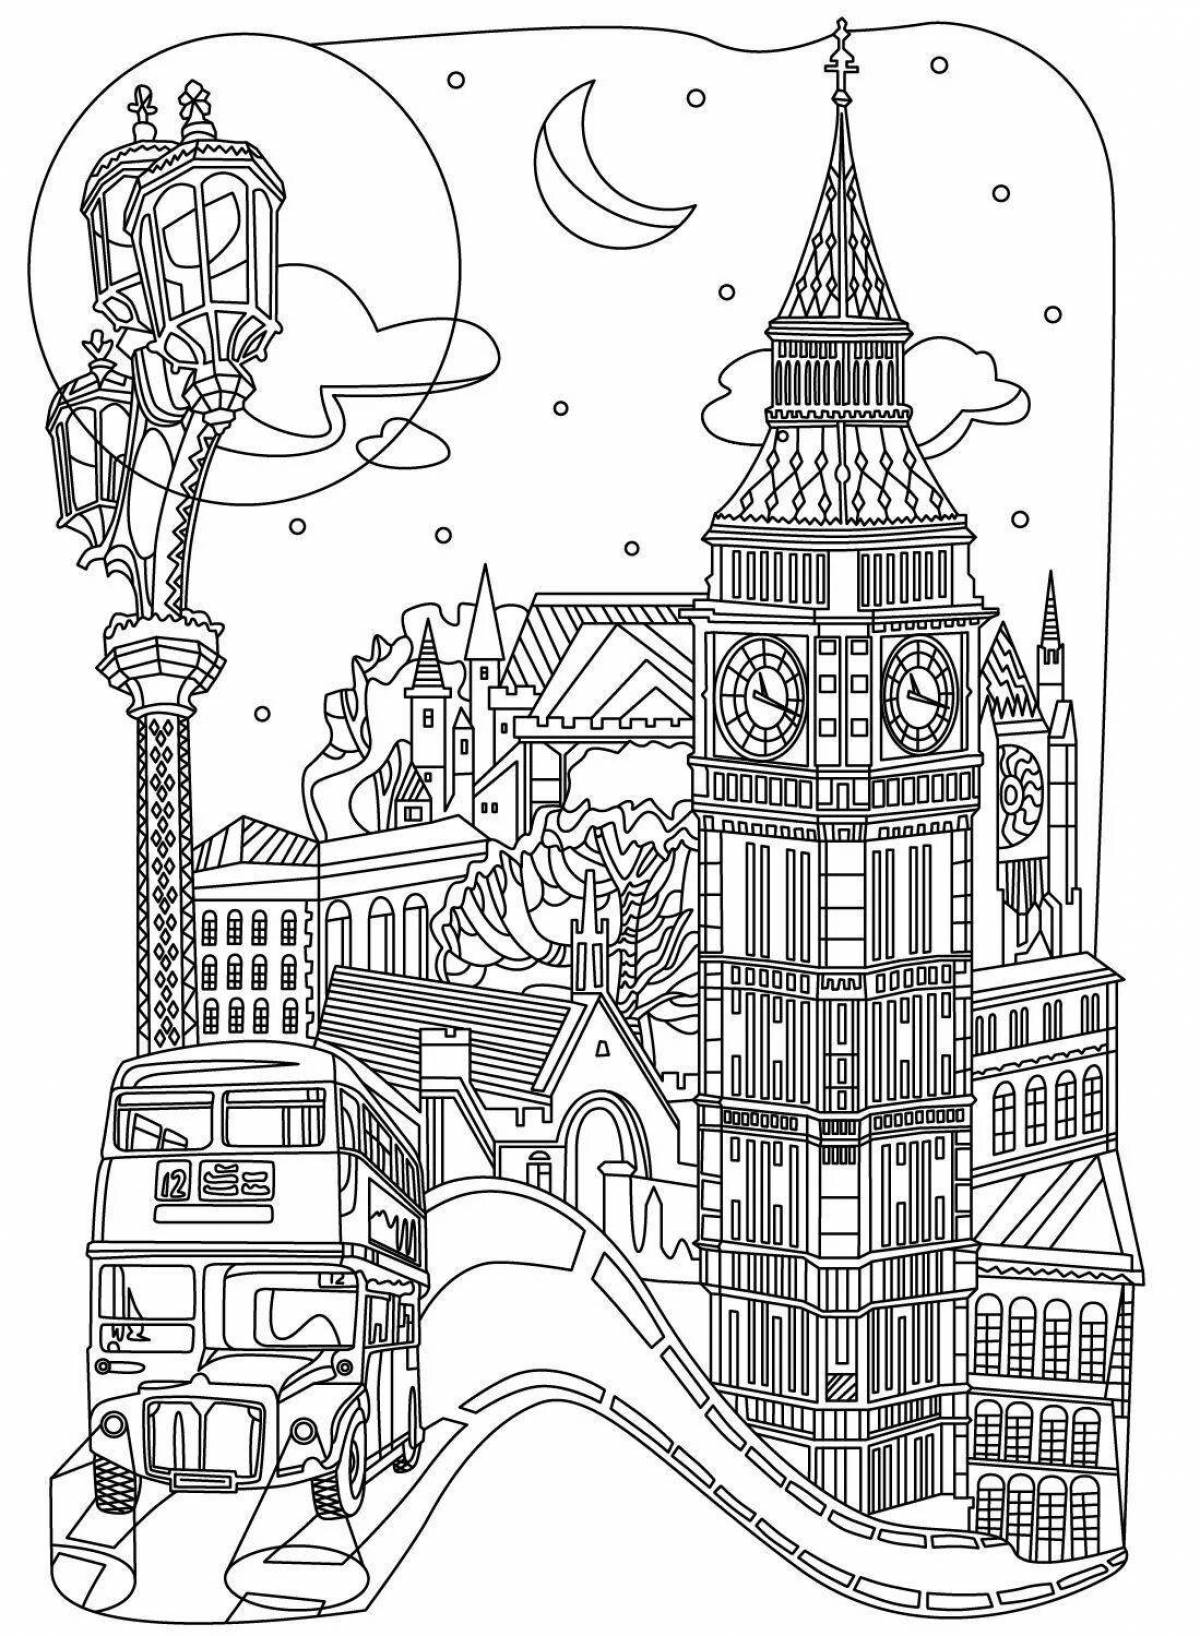 Colorful city coloring book for adults